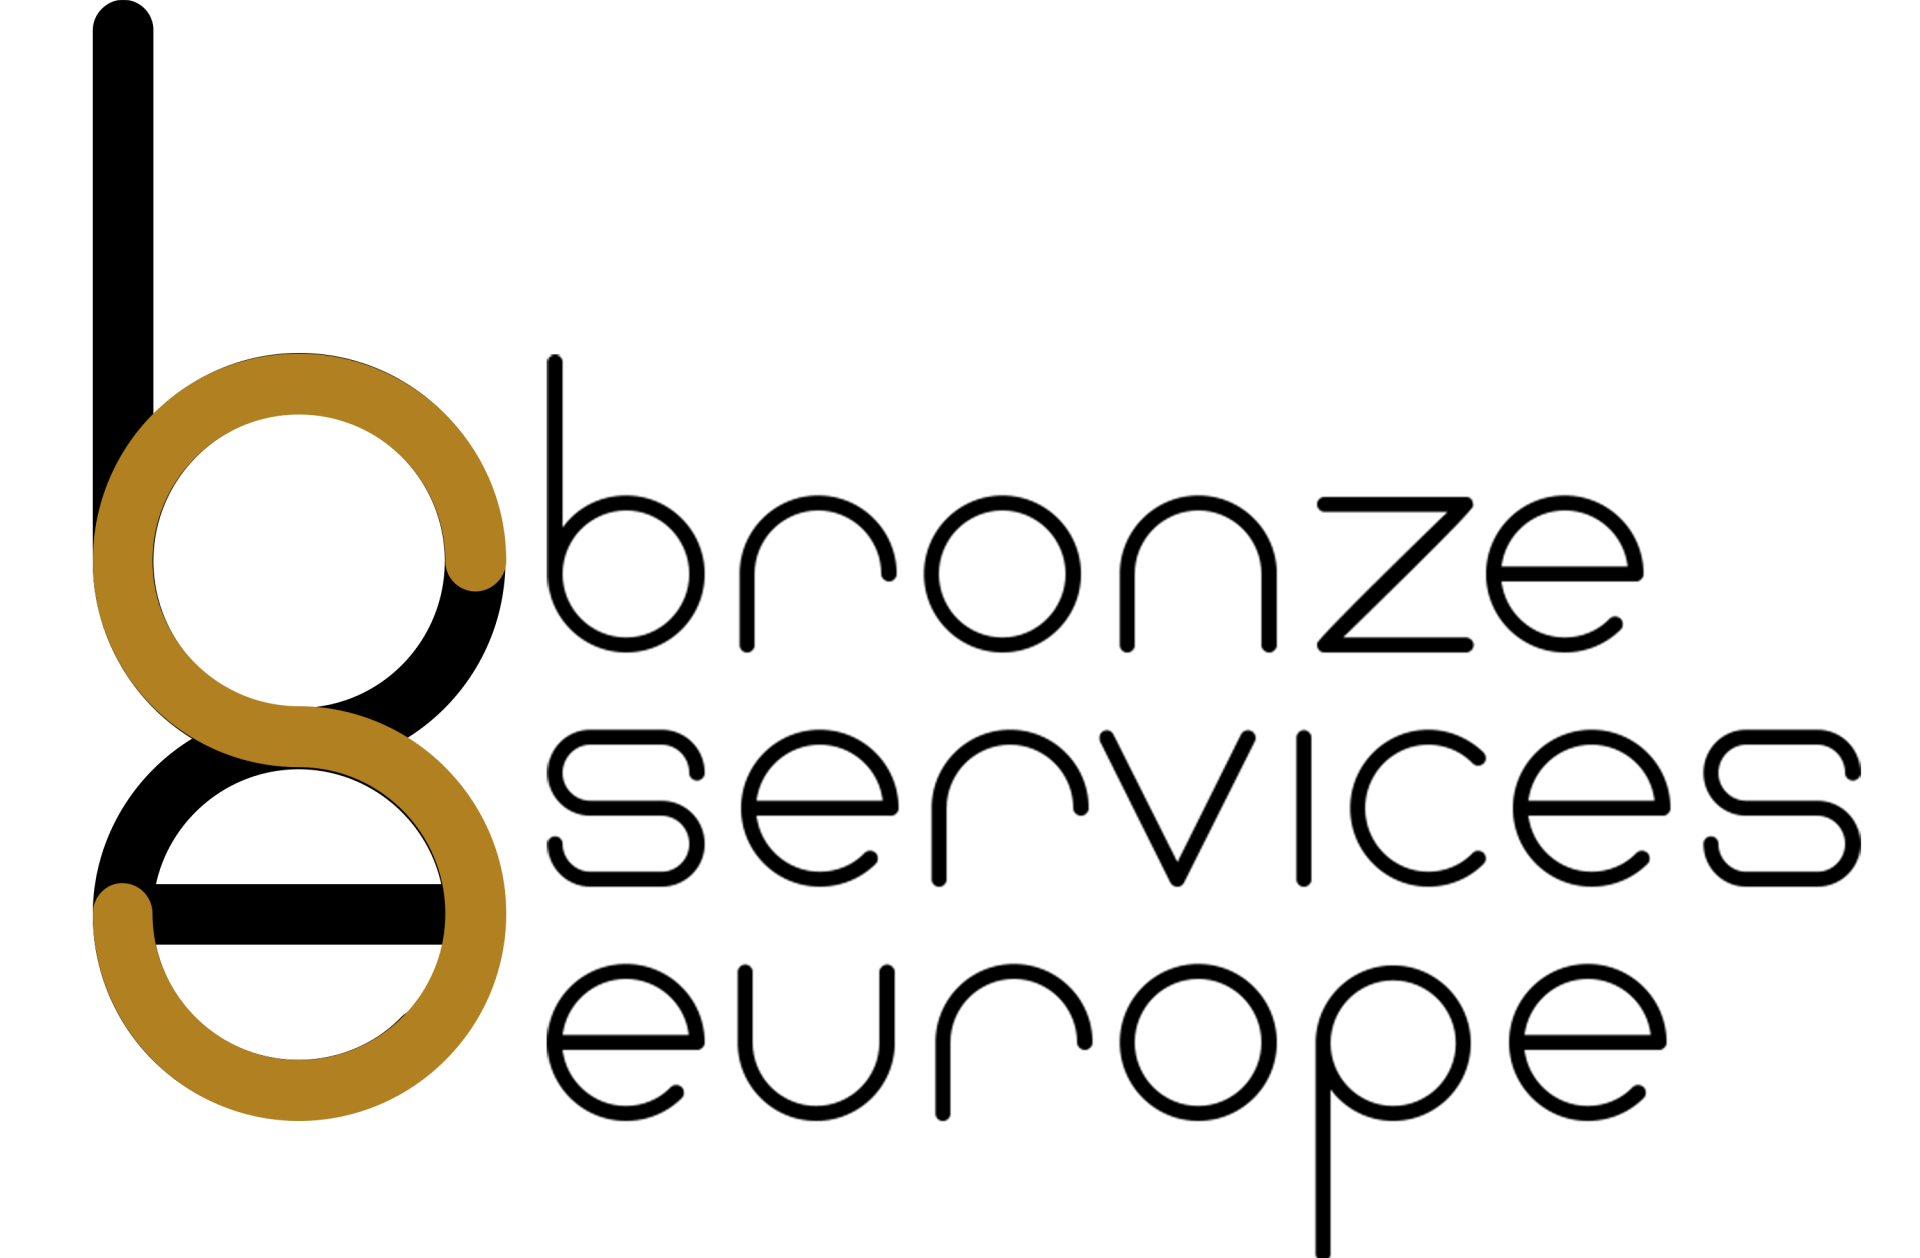 Bronze Services Europe Ltd logo. BSE lettering, followed by the business name in a modern font